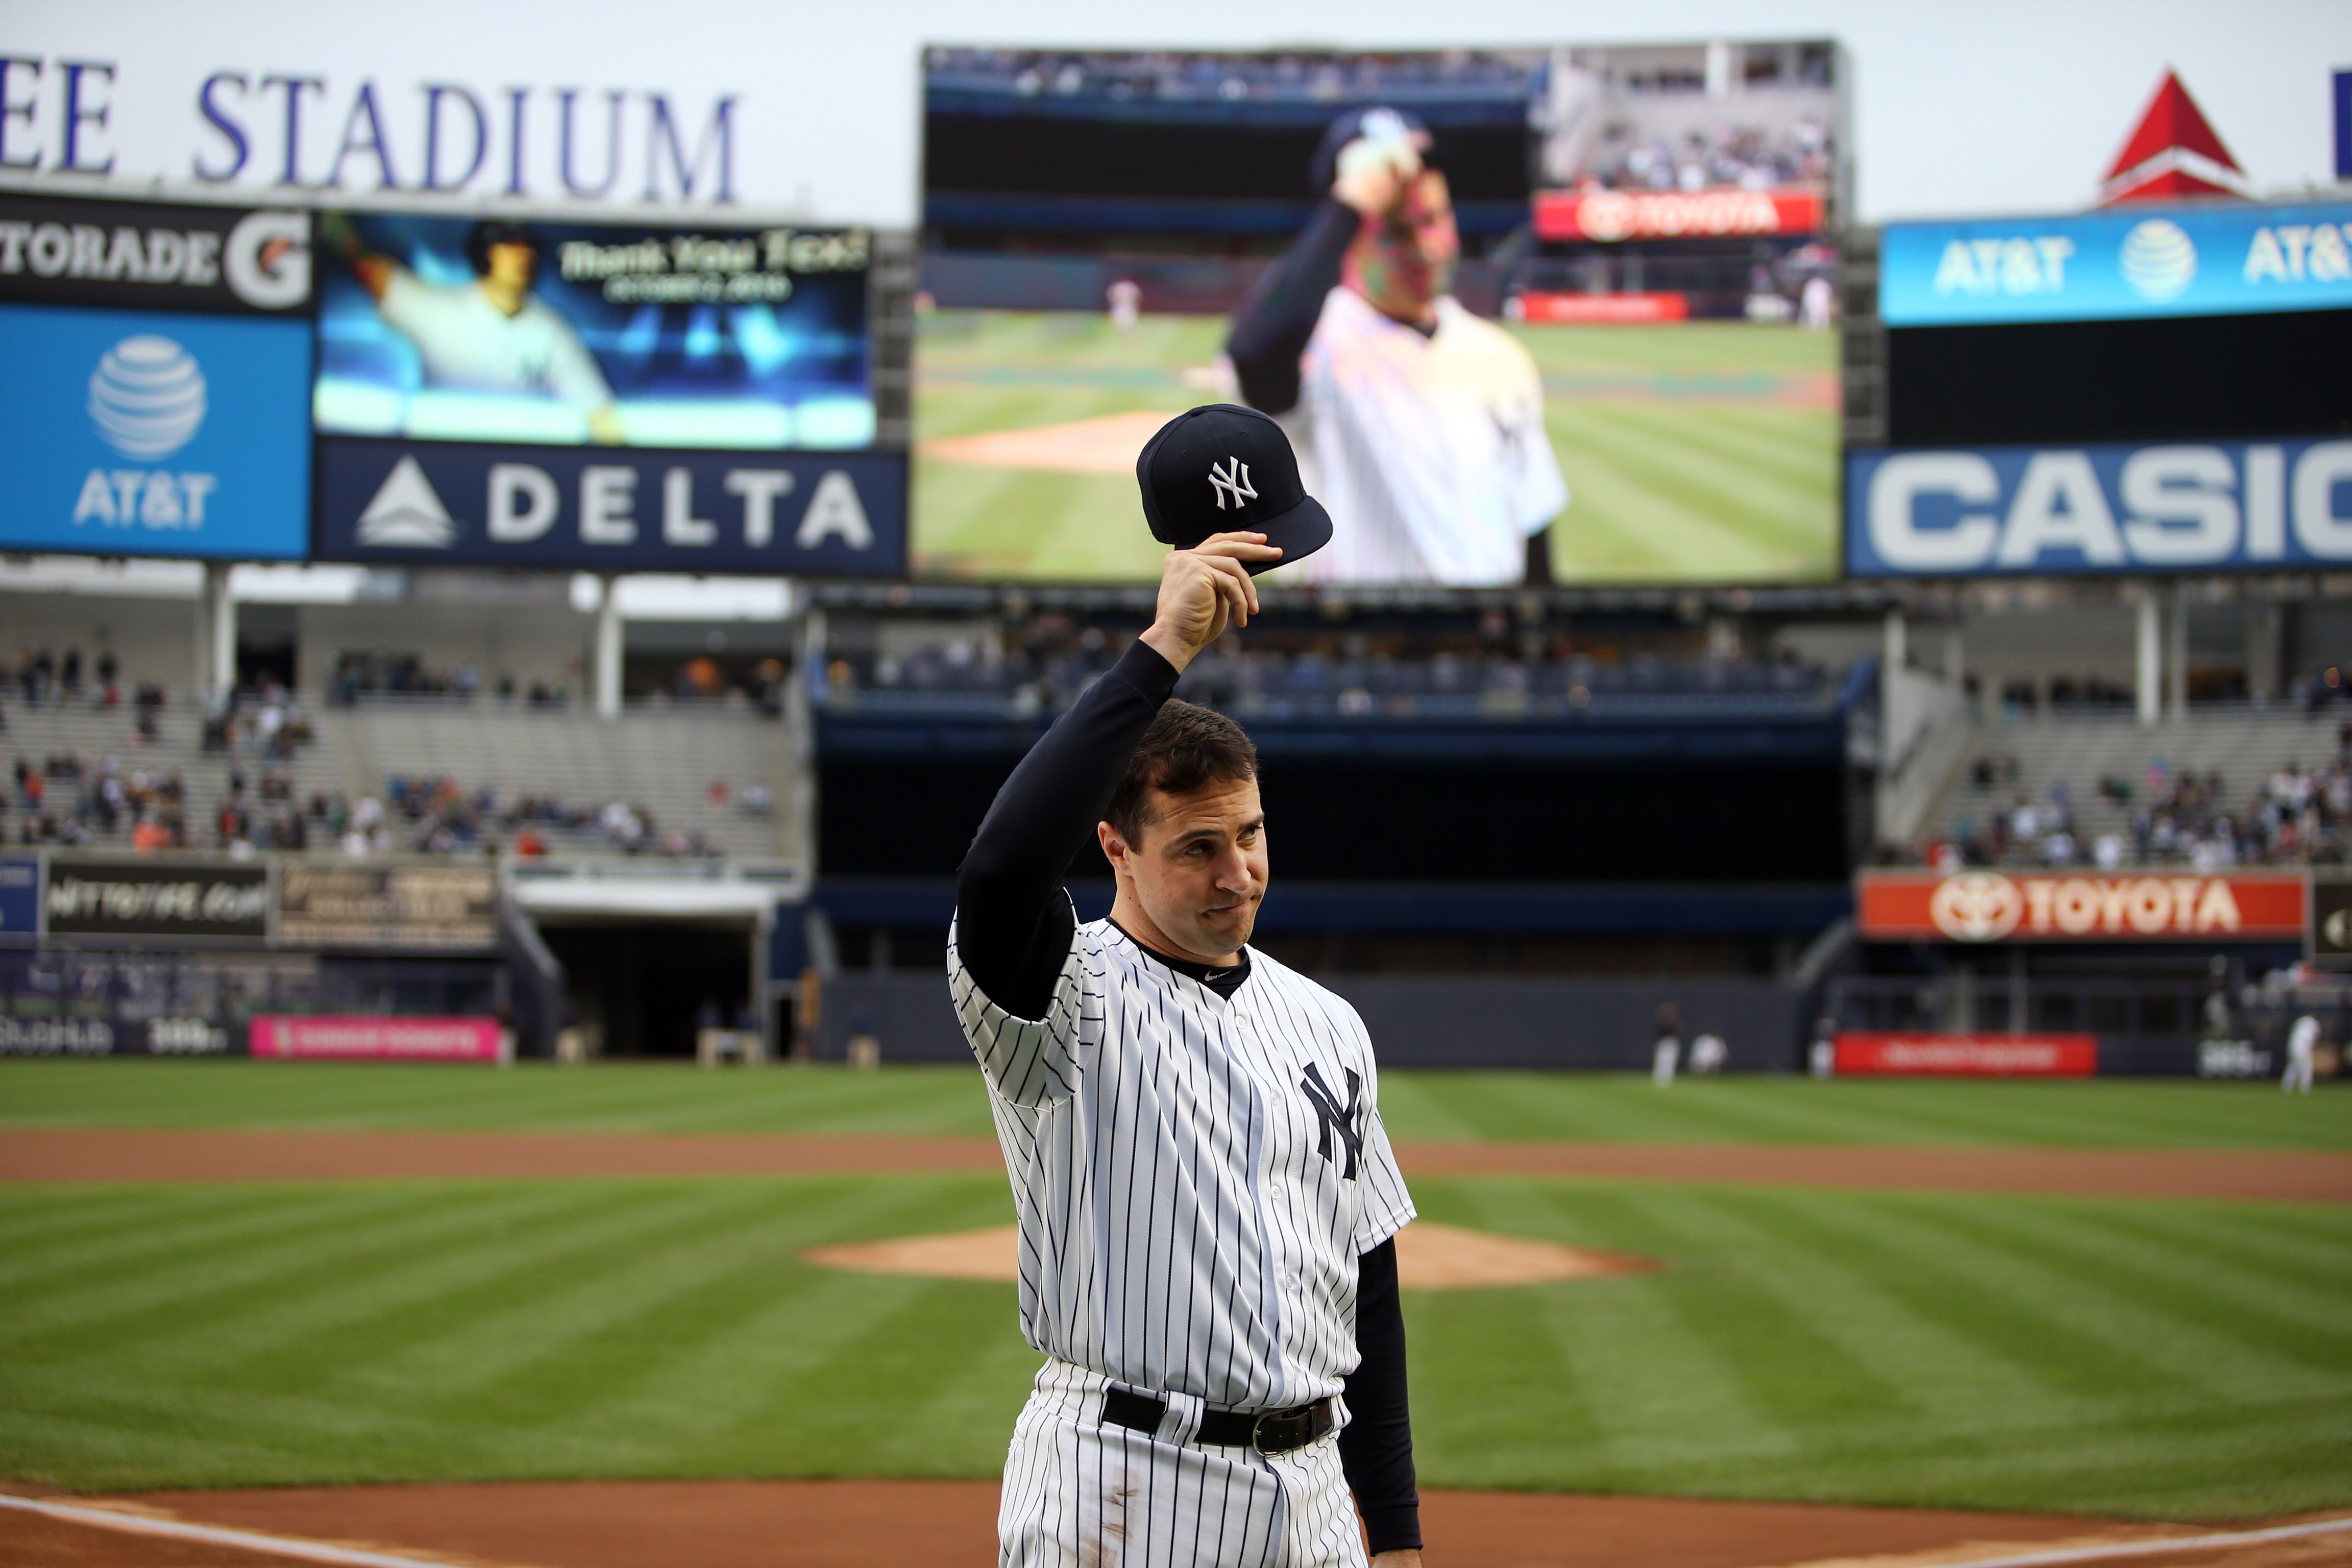 Mark Teixeira Is Expected to Join ESPN as an Analyst - The New York Times